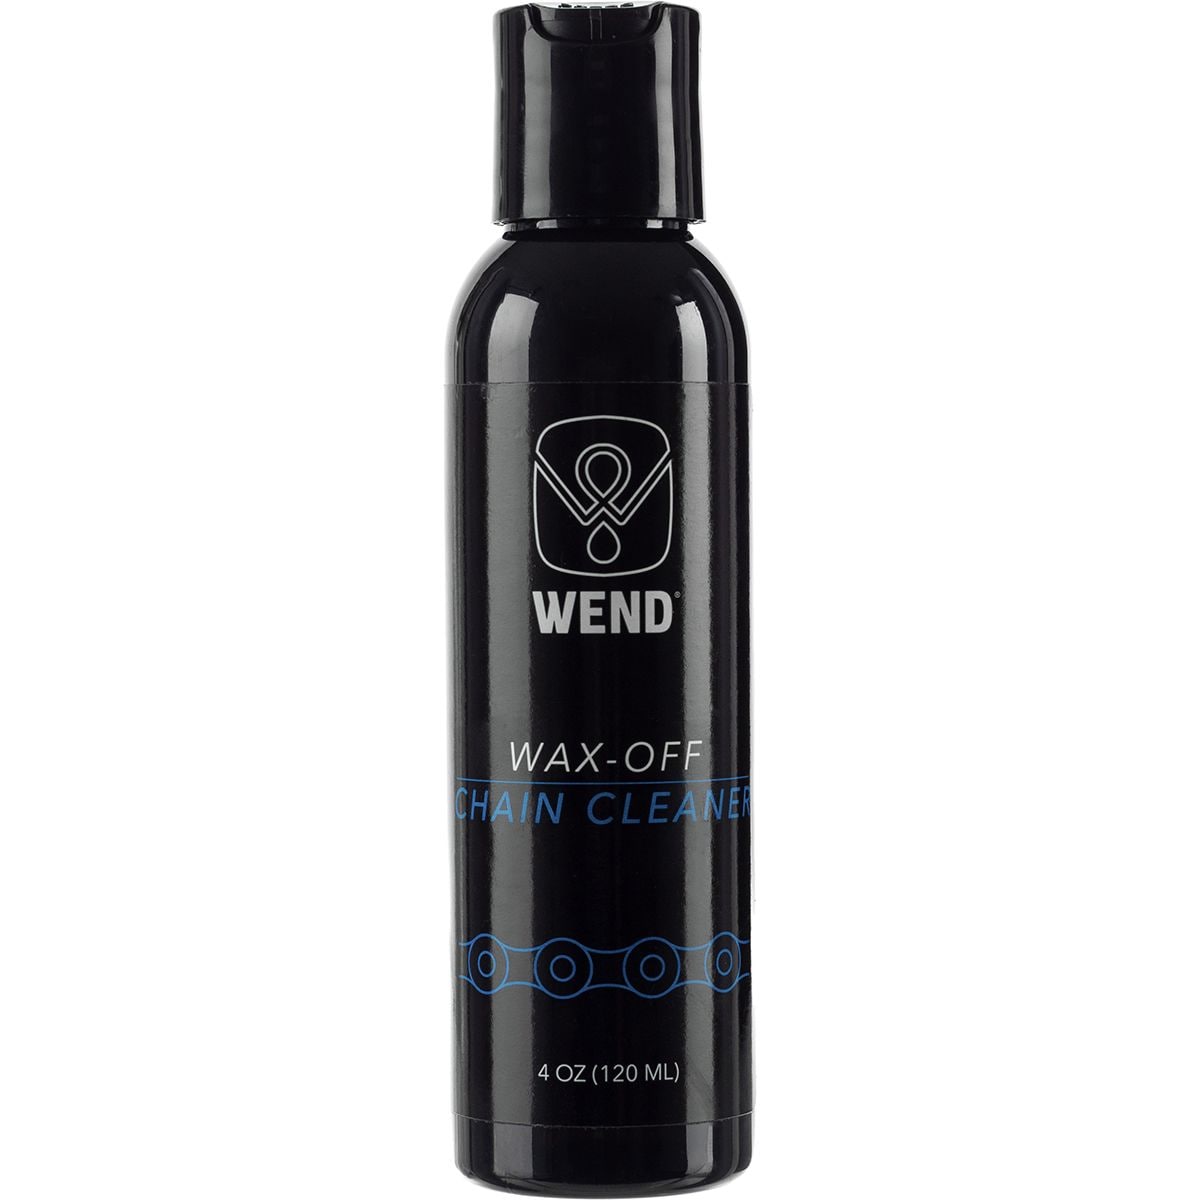 Wend MF Wax-Off Chain Cleaner